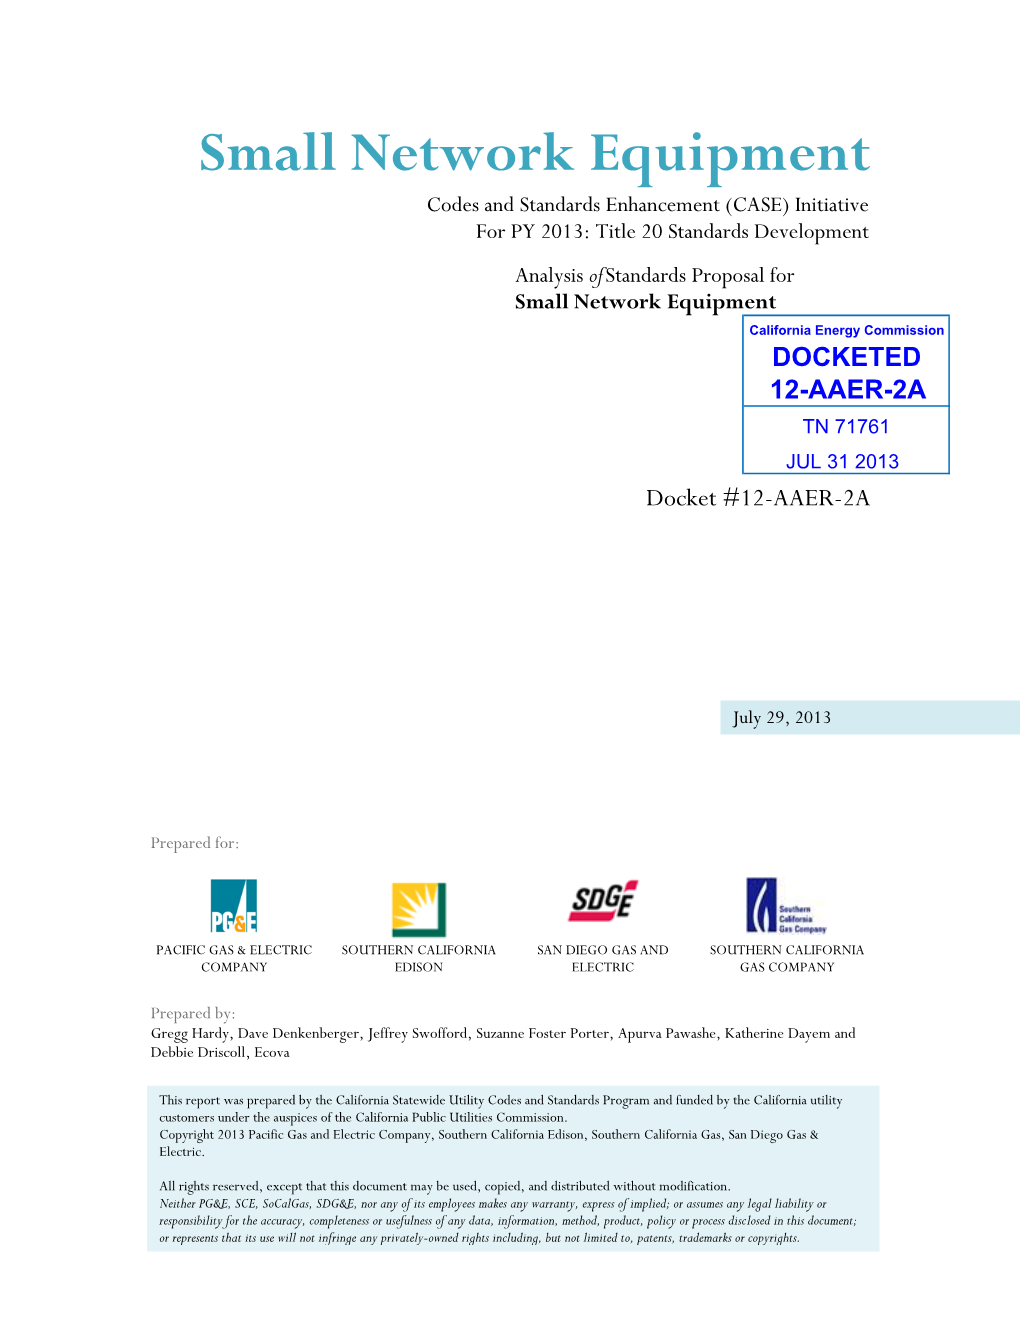 Small Network Equipment Codes and Standards Enhancement (CASE) Initiative for PY 2013: Title 20 Standards Development